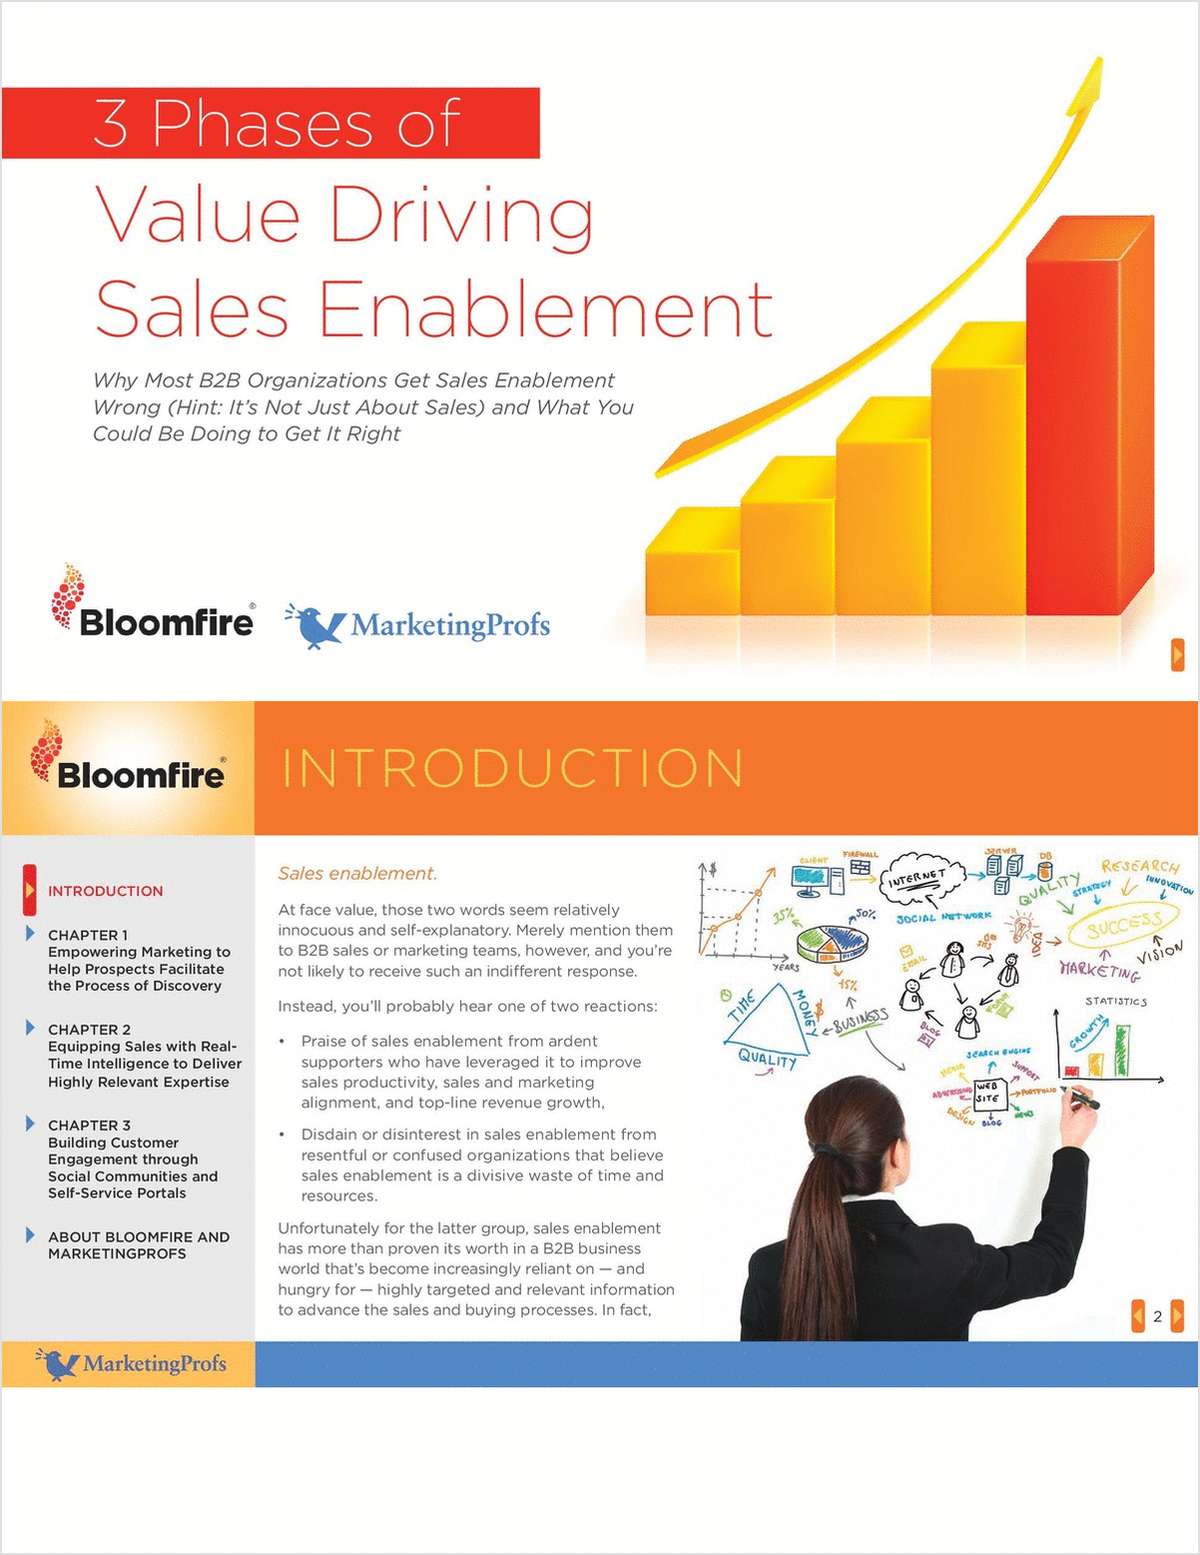 3 Phases of Value Driving Sales Enablement